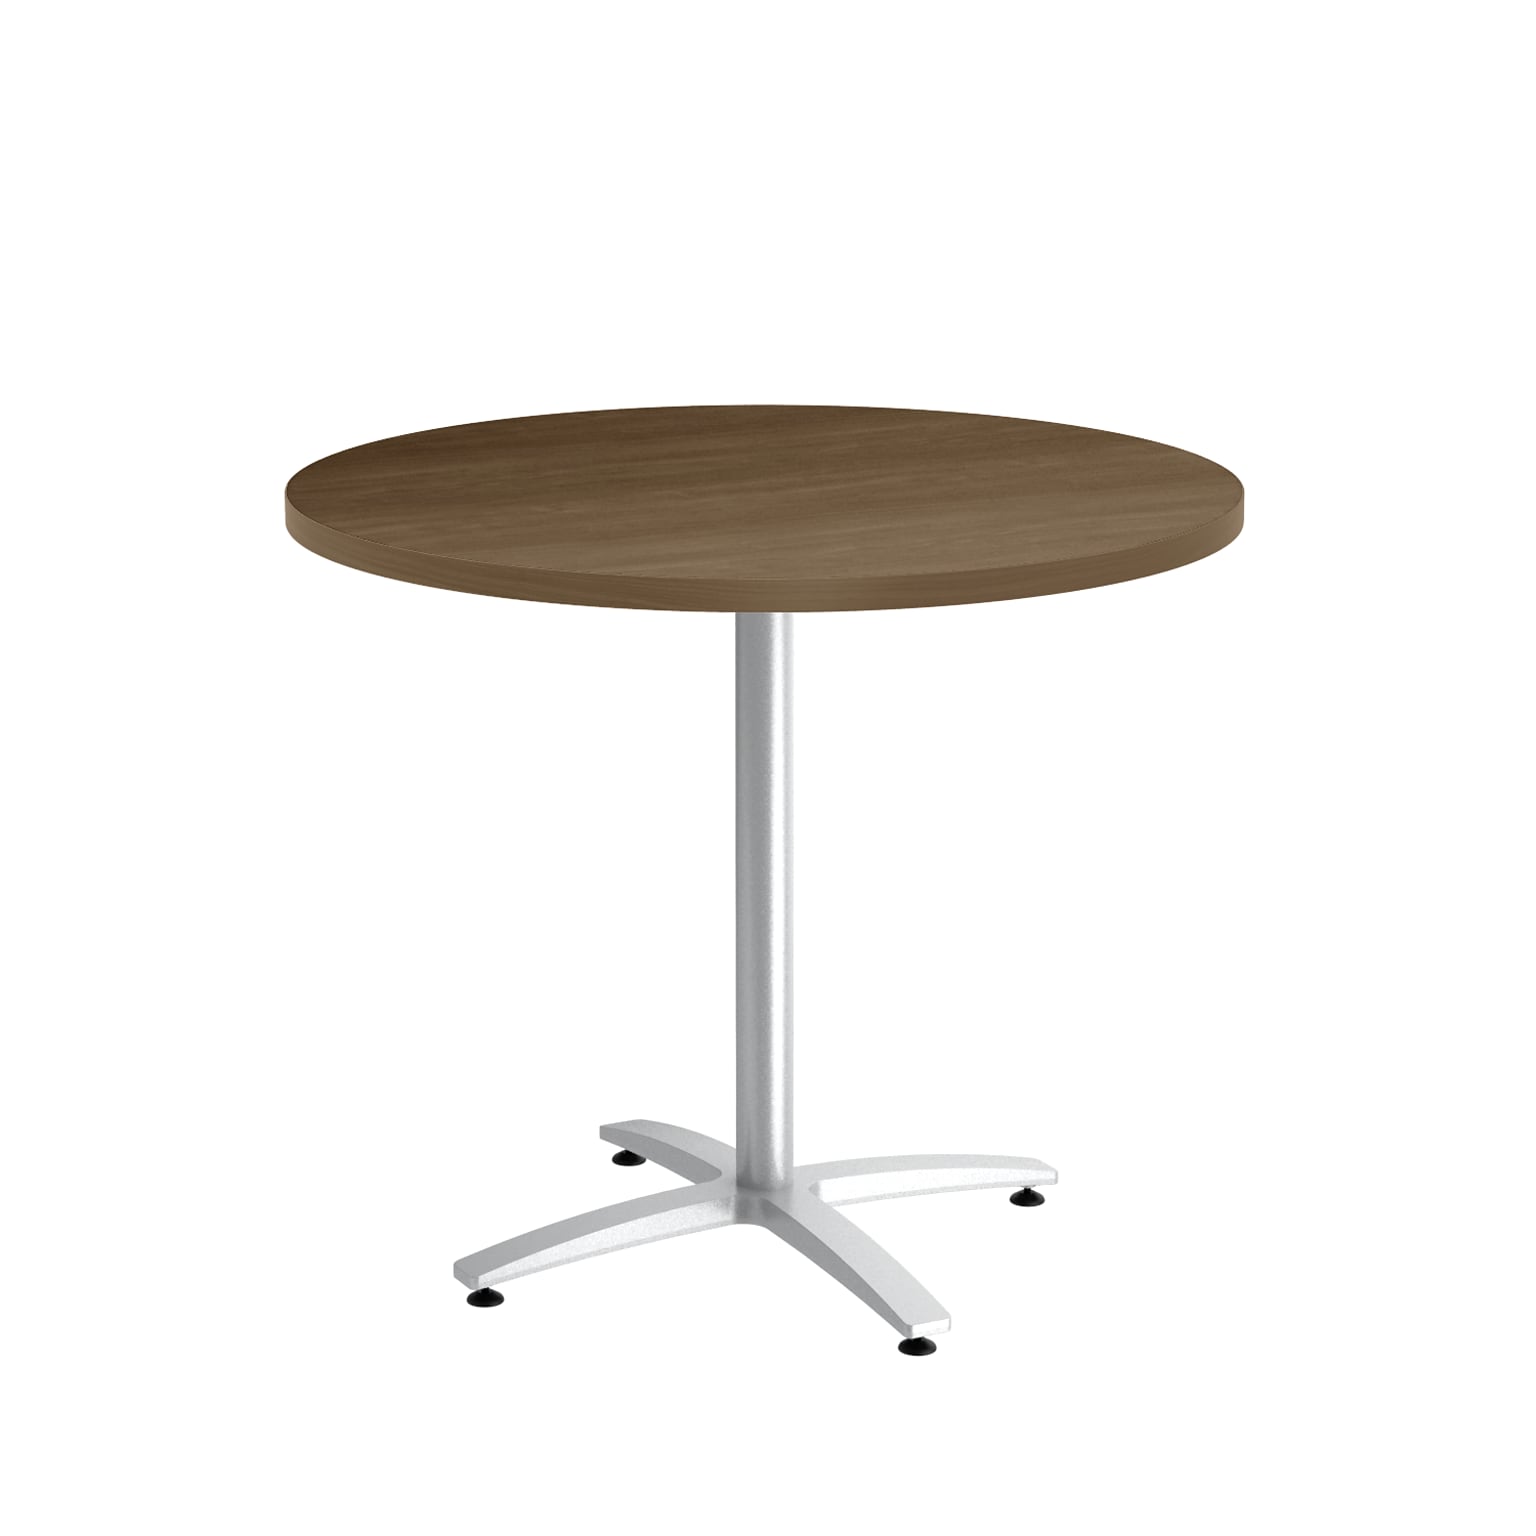 Union & Scale™ Workplace2.0™ Multipurpose 36 Round Pinnacle Laminate Seated Height Silver Base Table (54793)